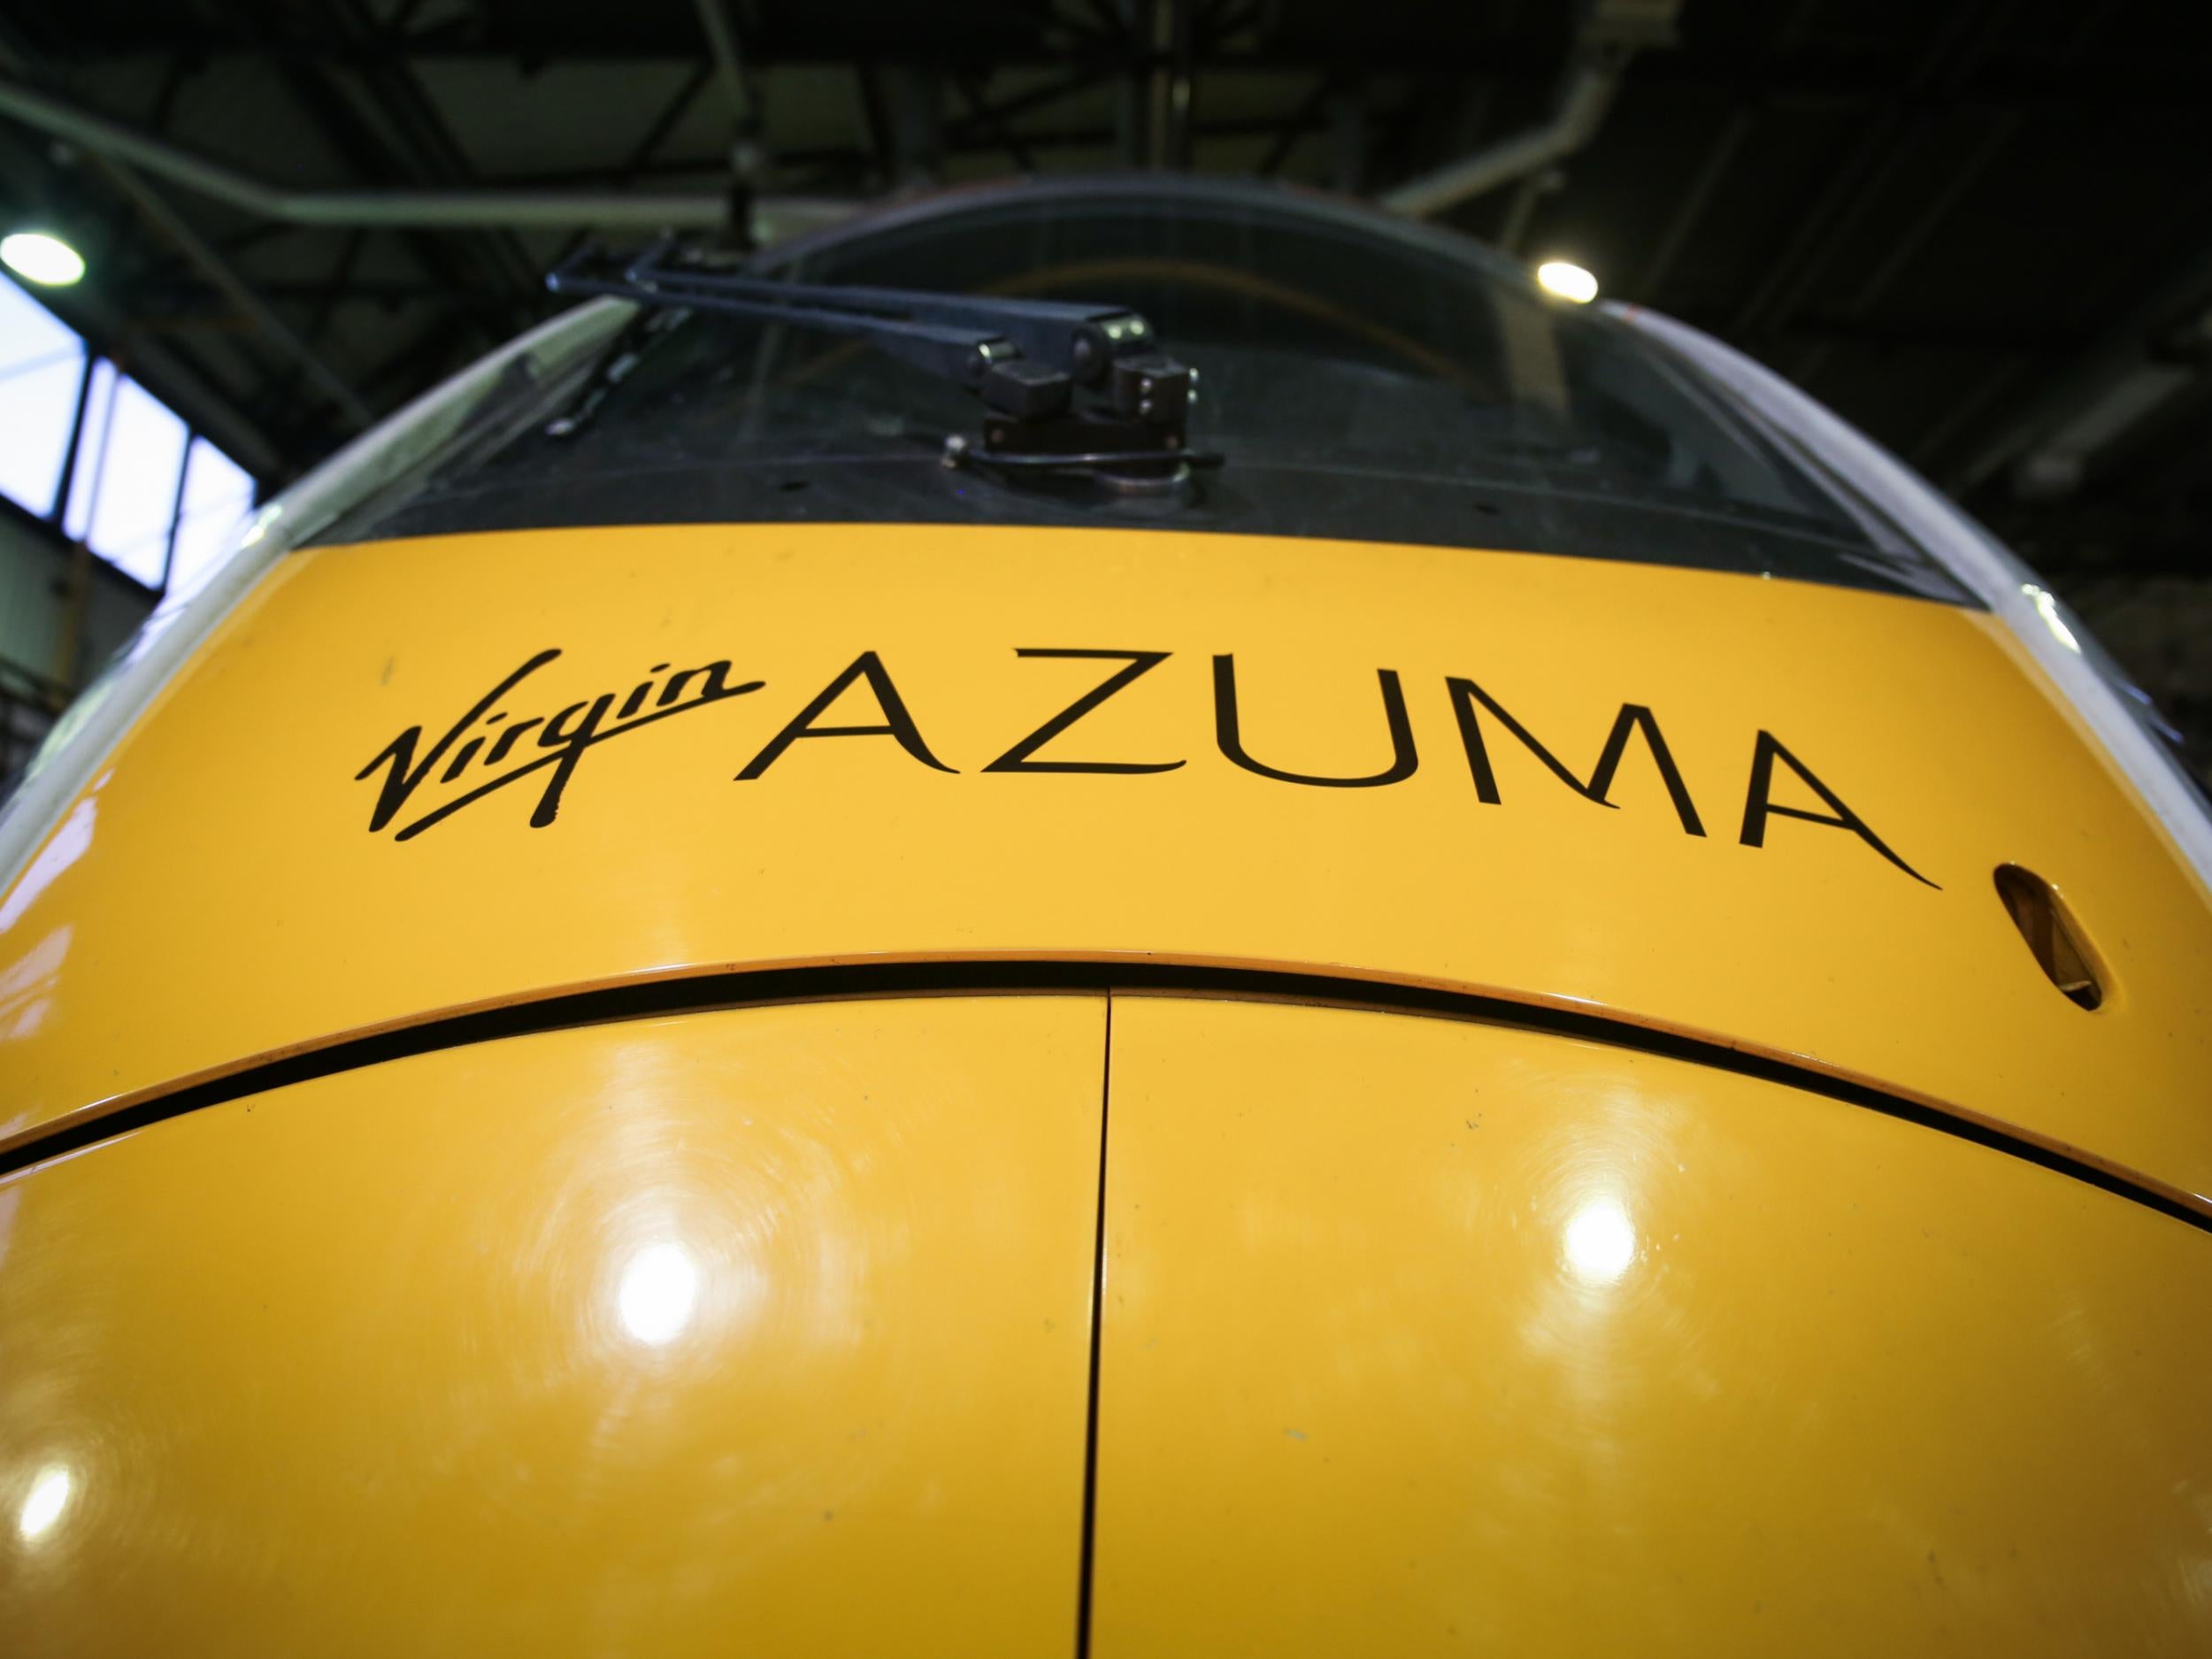 The Virgin Azuma is set to be one of the most advanced trains on the UK’s rail network